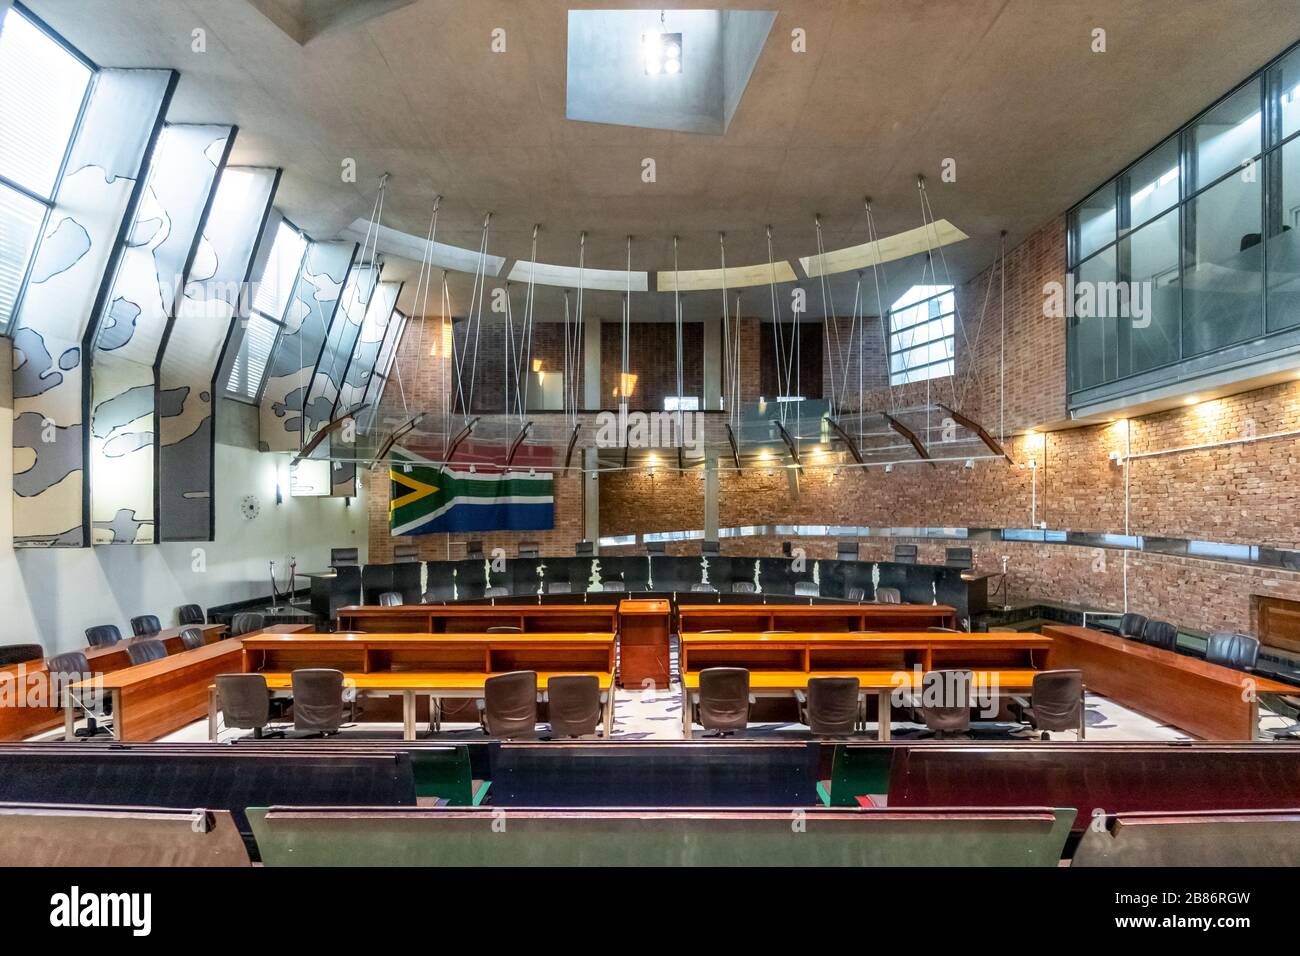 Johannesburg, South Africa - May 26, 2019: Interior of Constitutional Court of South Africa Stock Photo